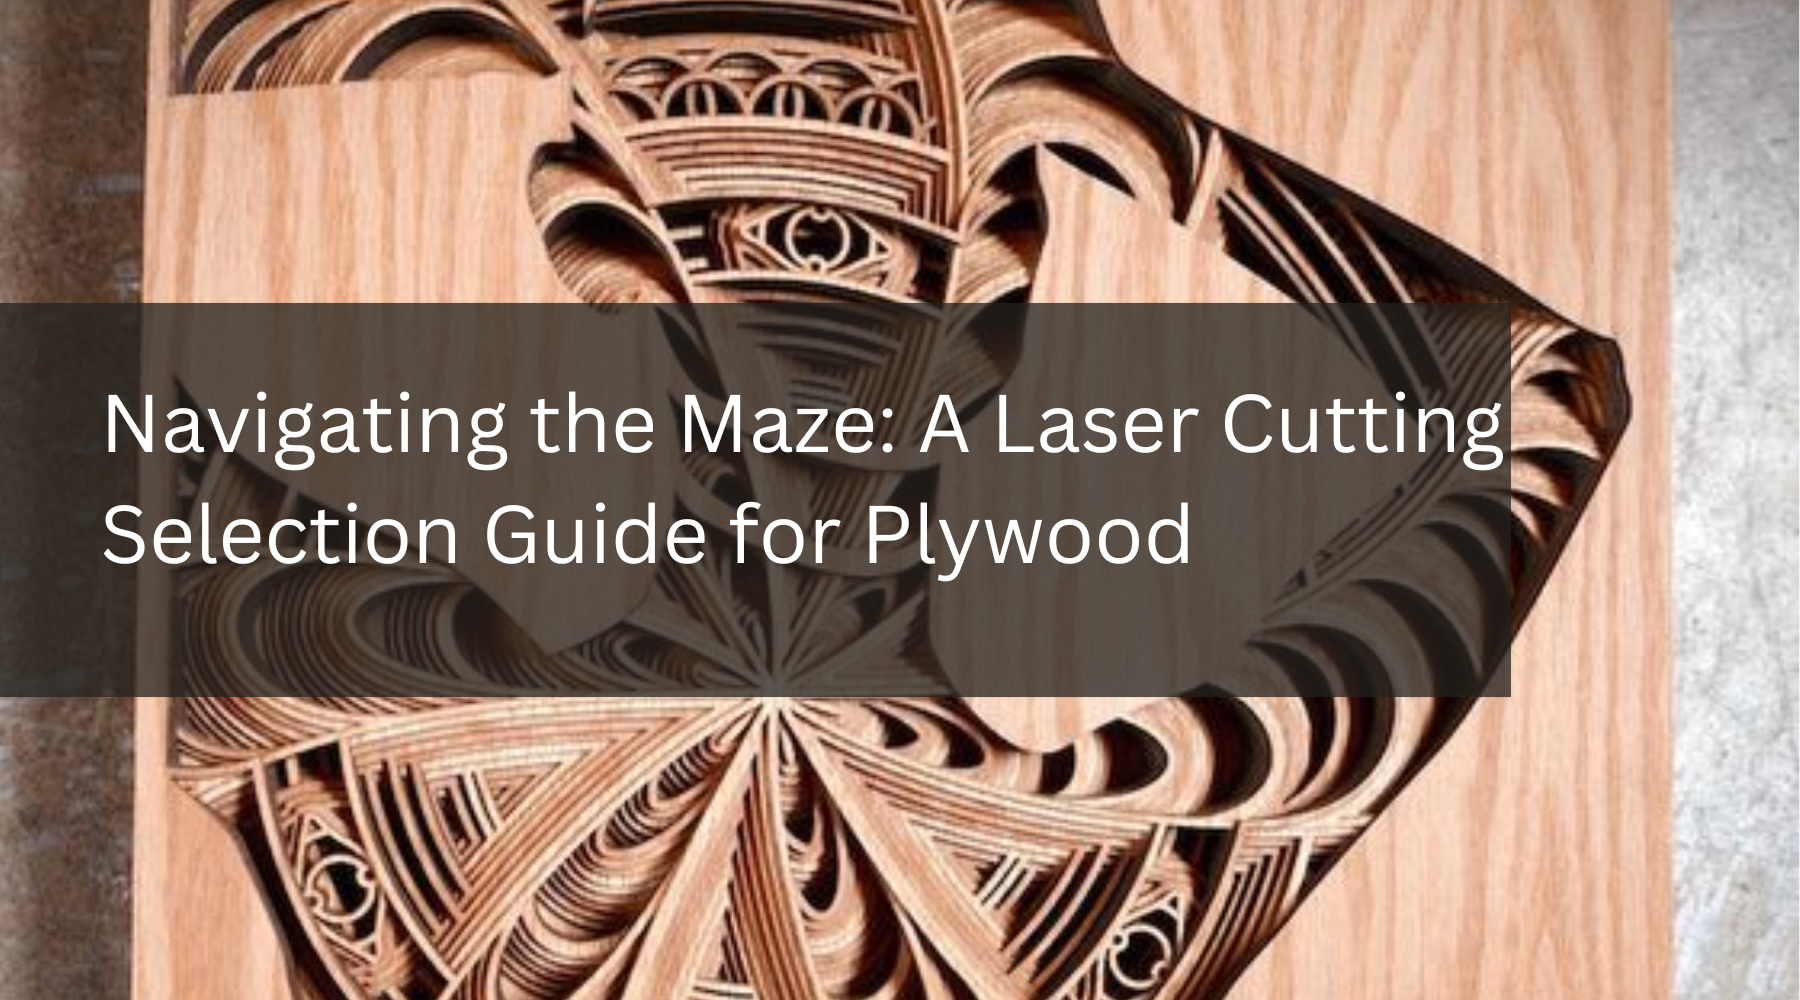 Navigating the Maze: A Laser Cutting Selection Guide for Plywood